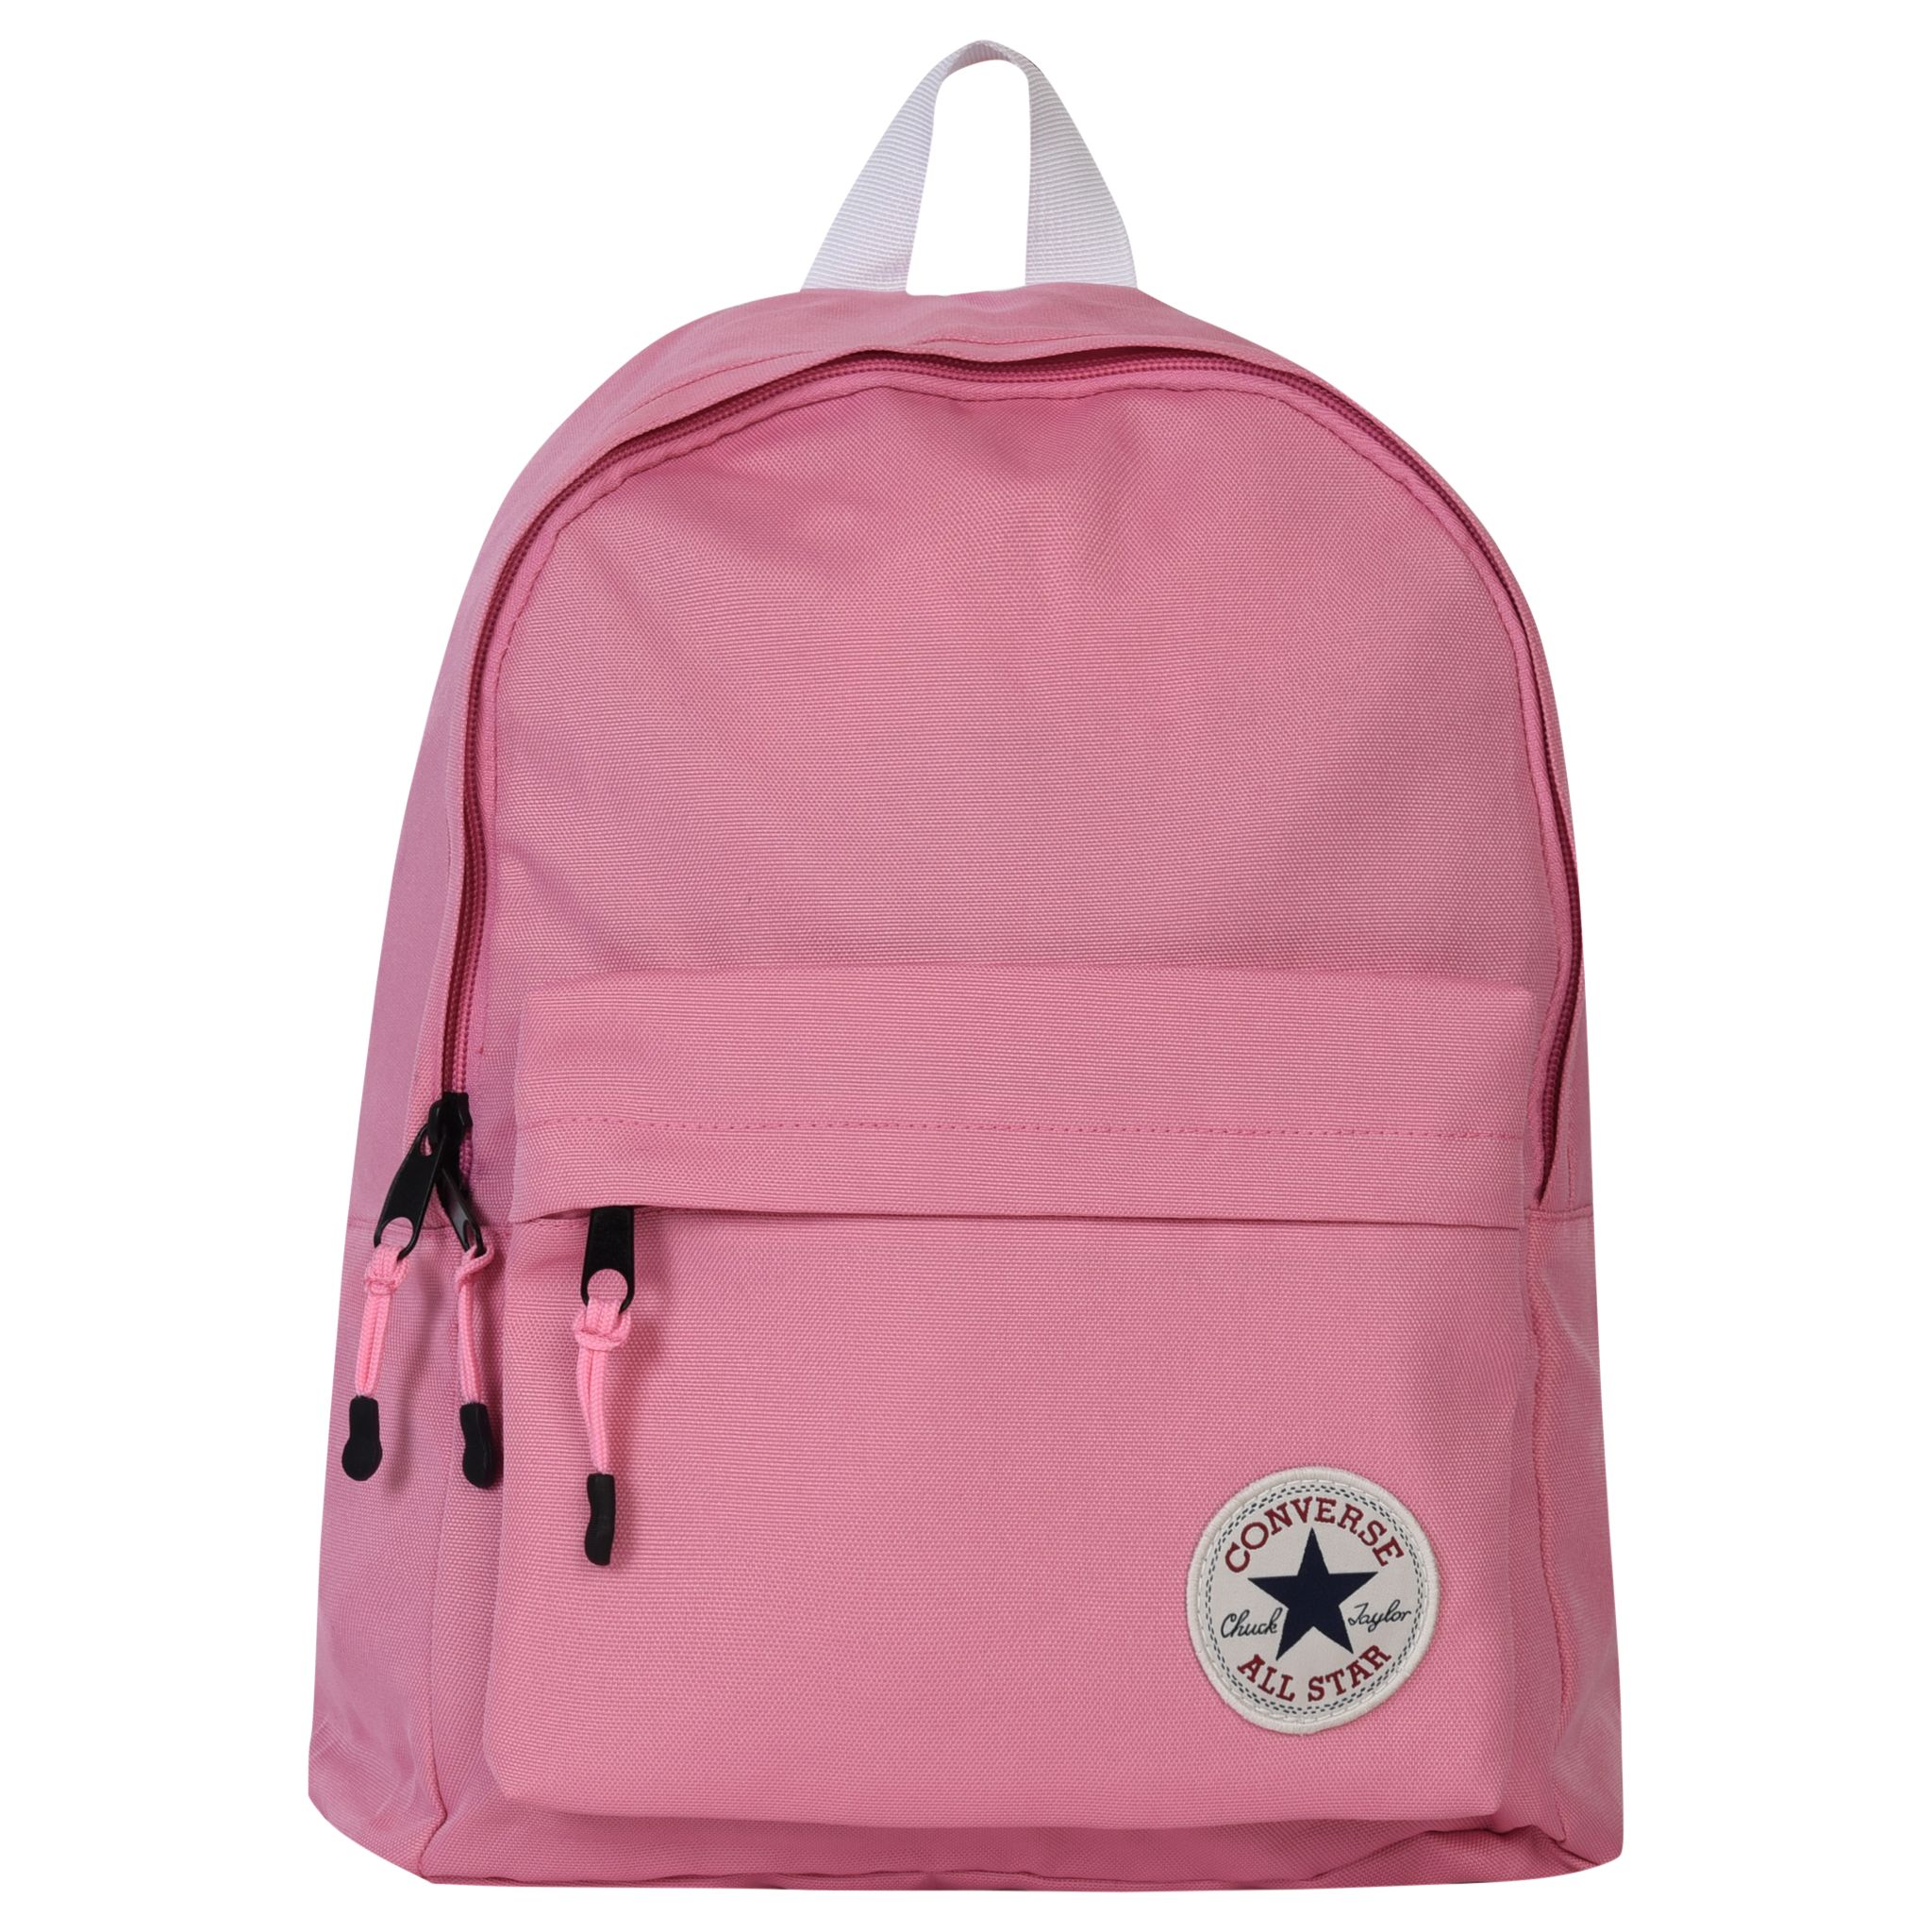 converse rubber backpack review